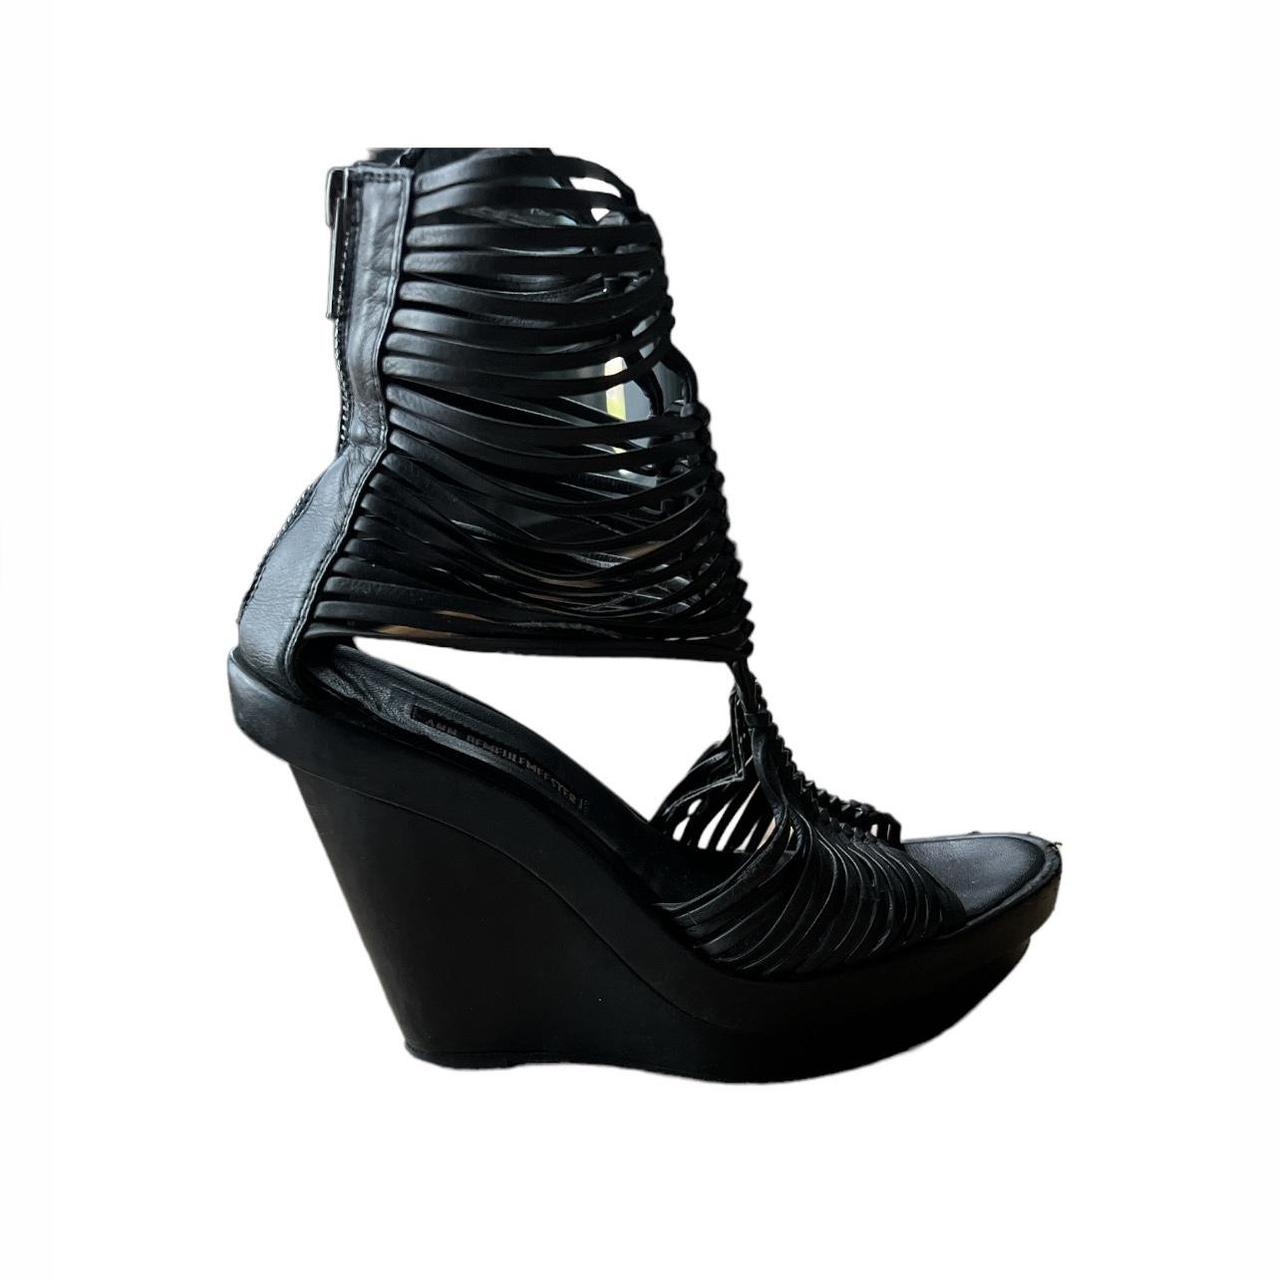 Product Image 1 - Ann Demeulemeester
Black multi-strap leather sandals